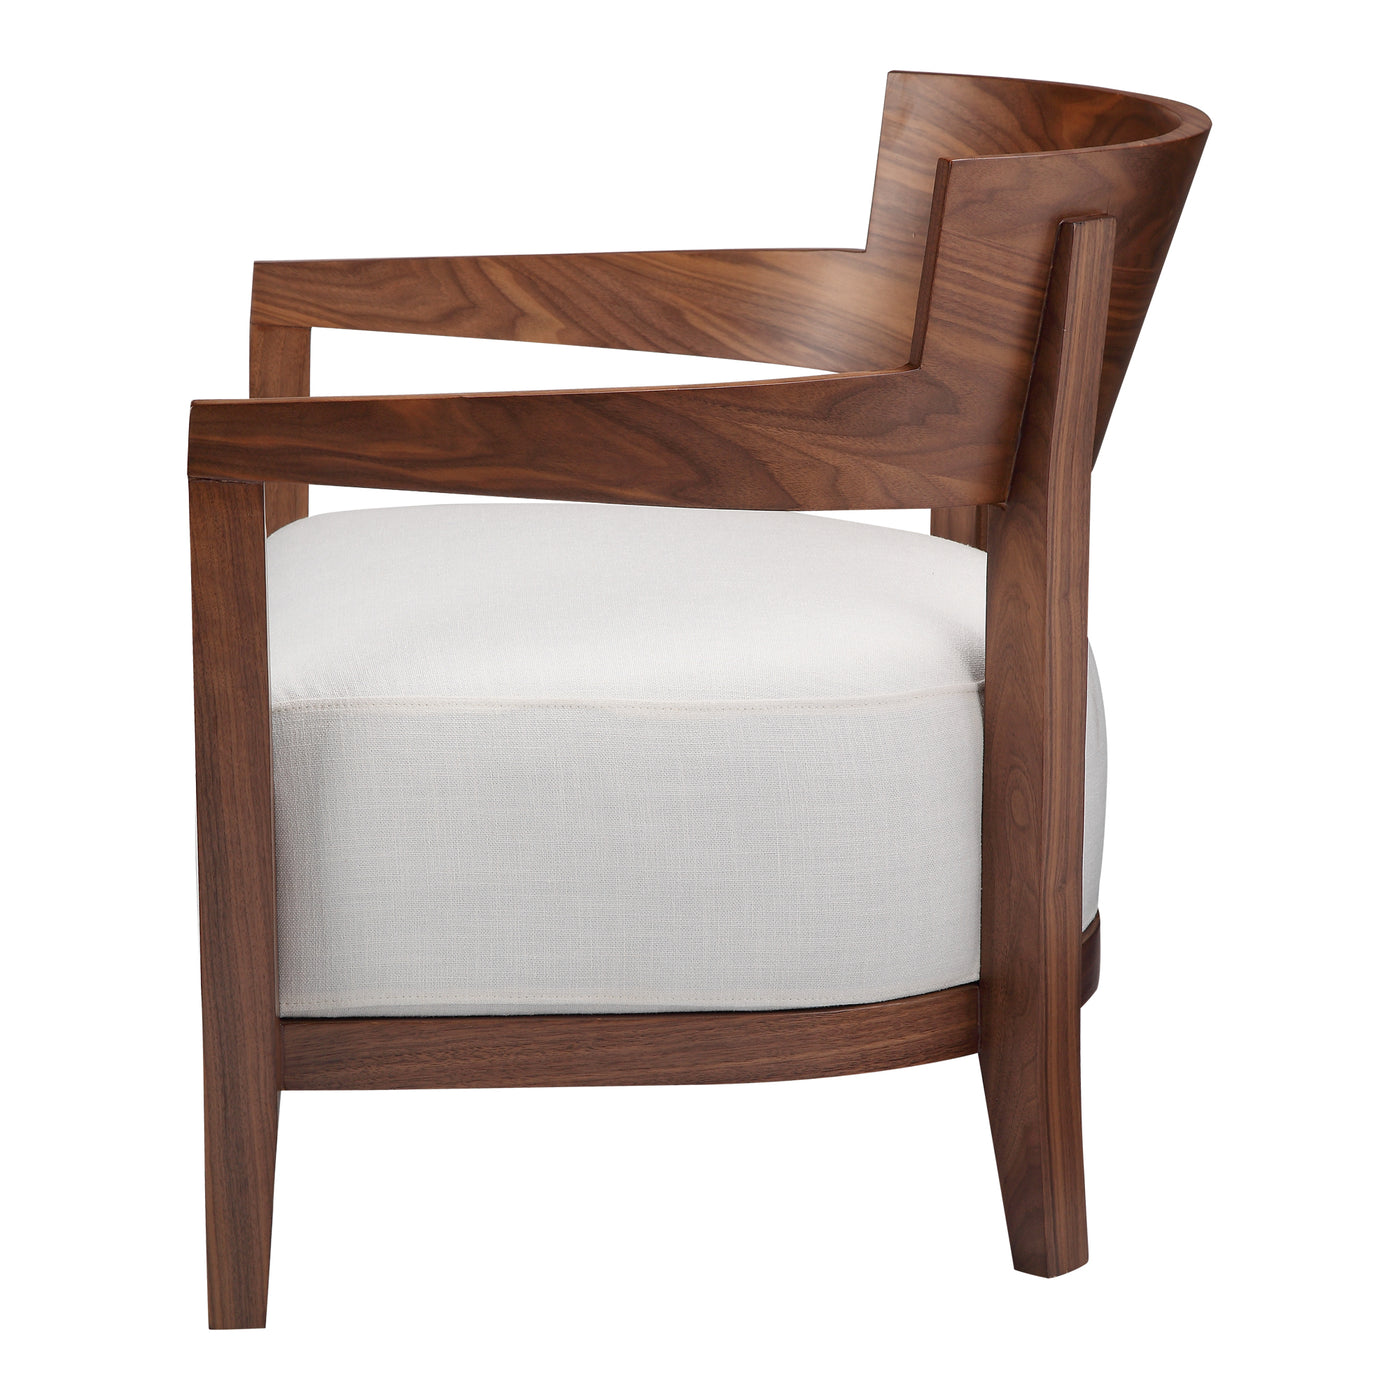 The Volta armchair will never let you down when it comes to comfort and style. Its expertly crafted solid wood frame provi...